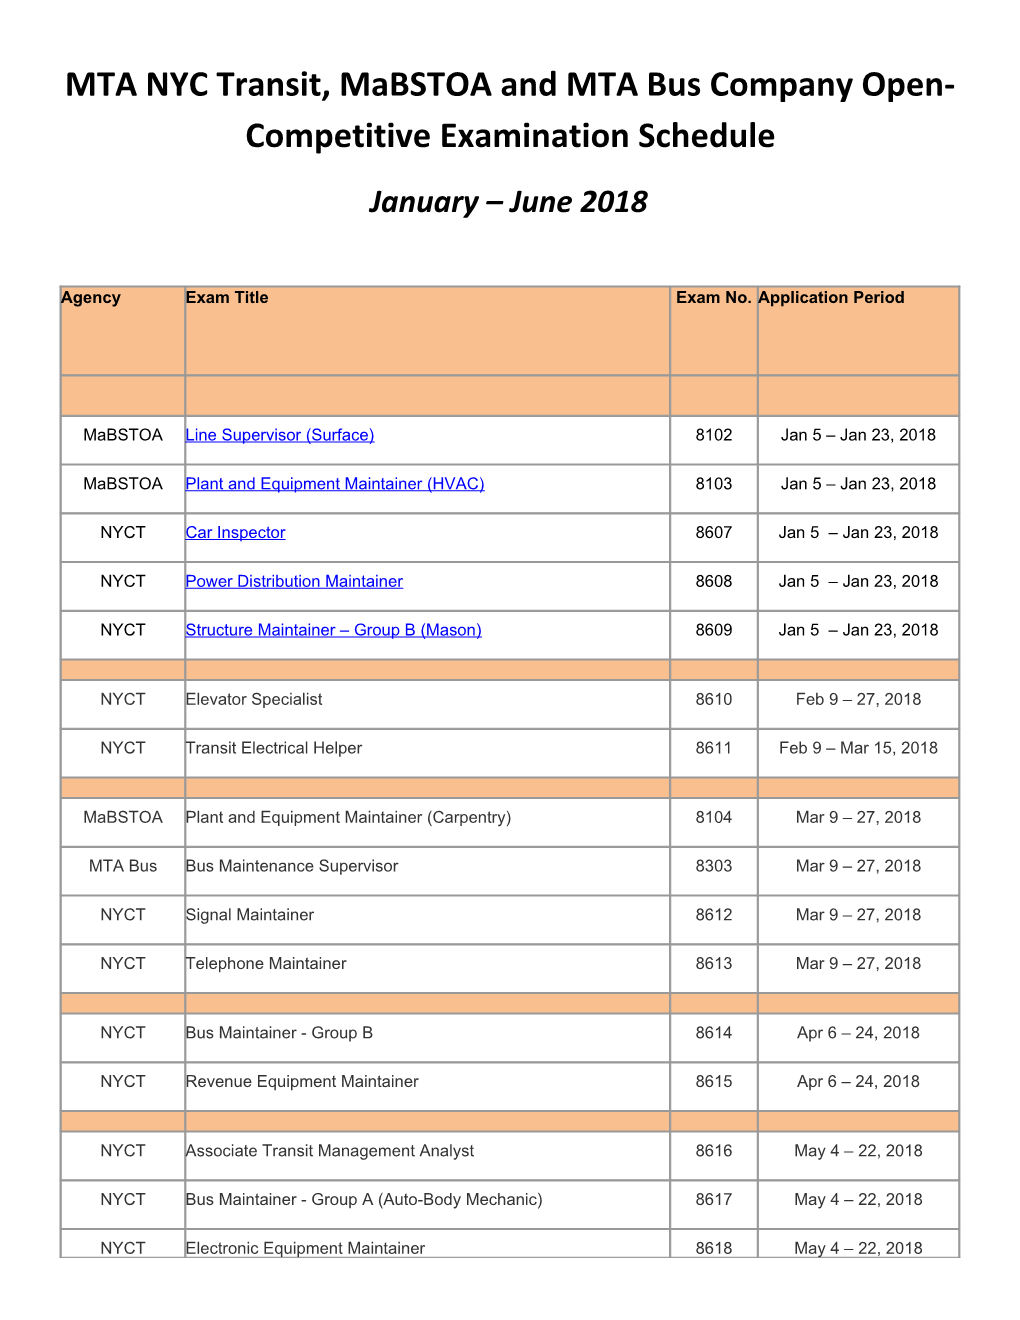 MTA NYC Transit, Mabstoa and MTA Bus Company Open-Competitive Examination Schedule